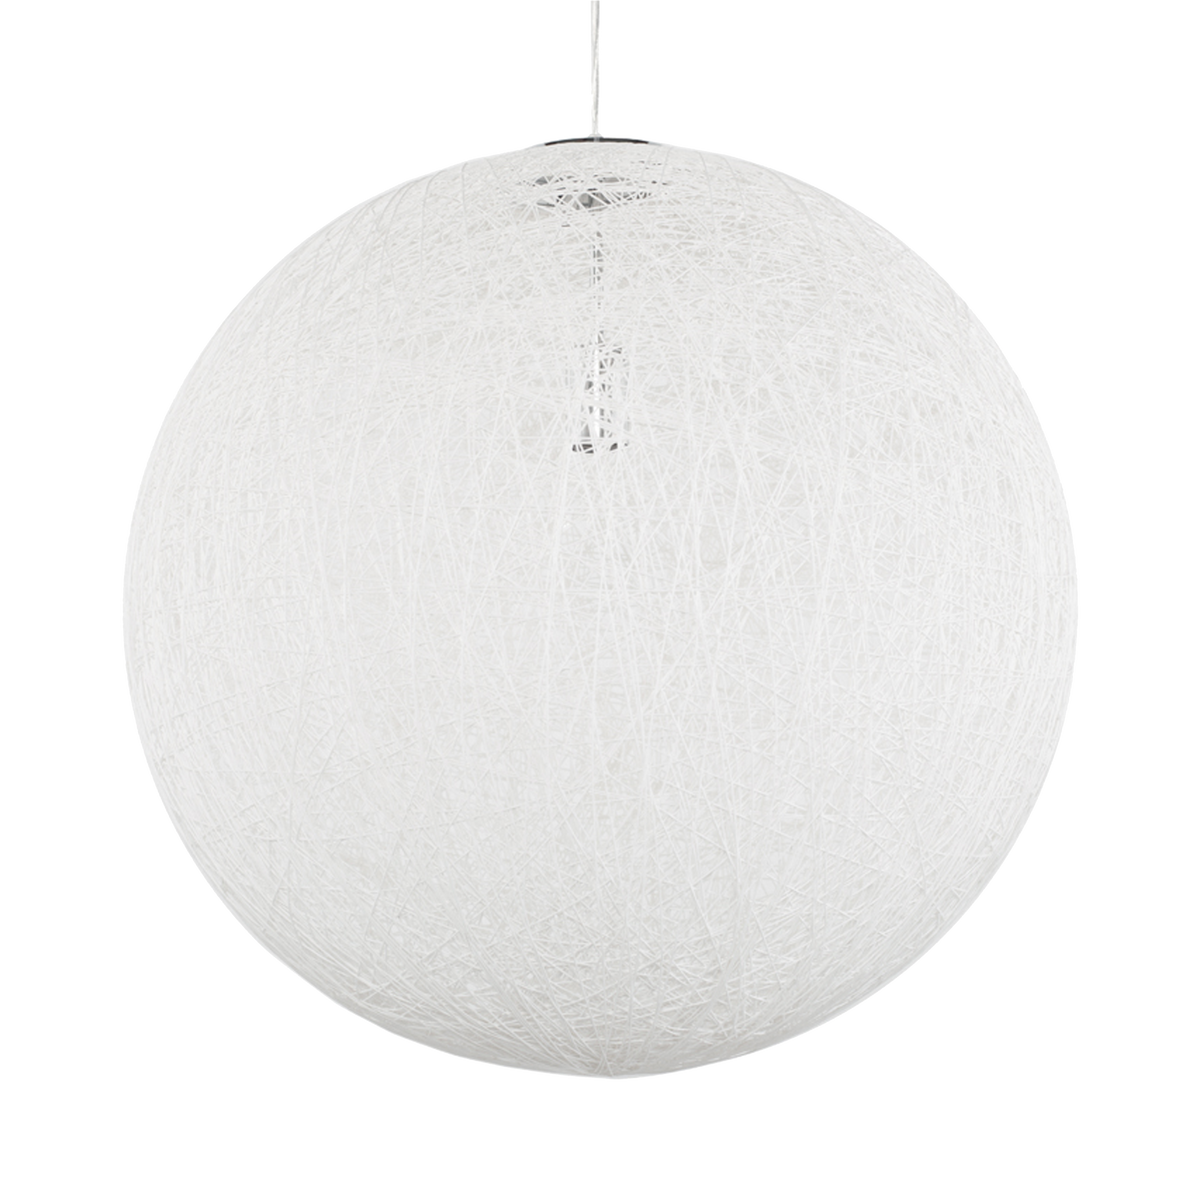 The String pendant lamp, a classical light weight spherical design popularized in the early 1960's, defined by its molded string shell embodying texture, simplicity and the warmth 